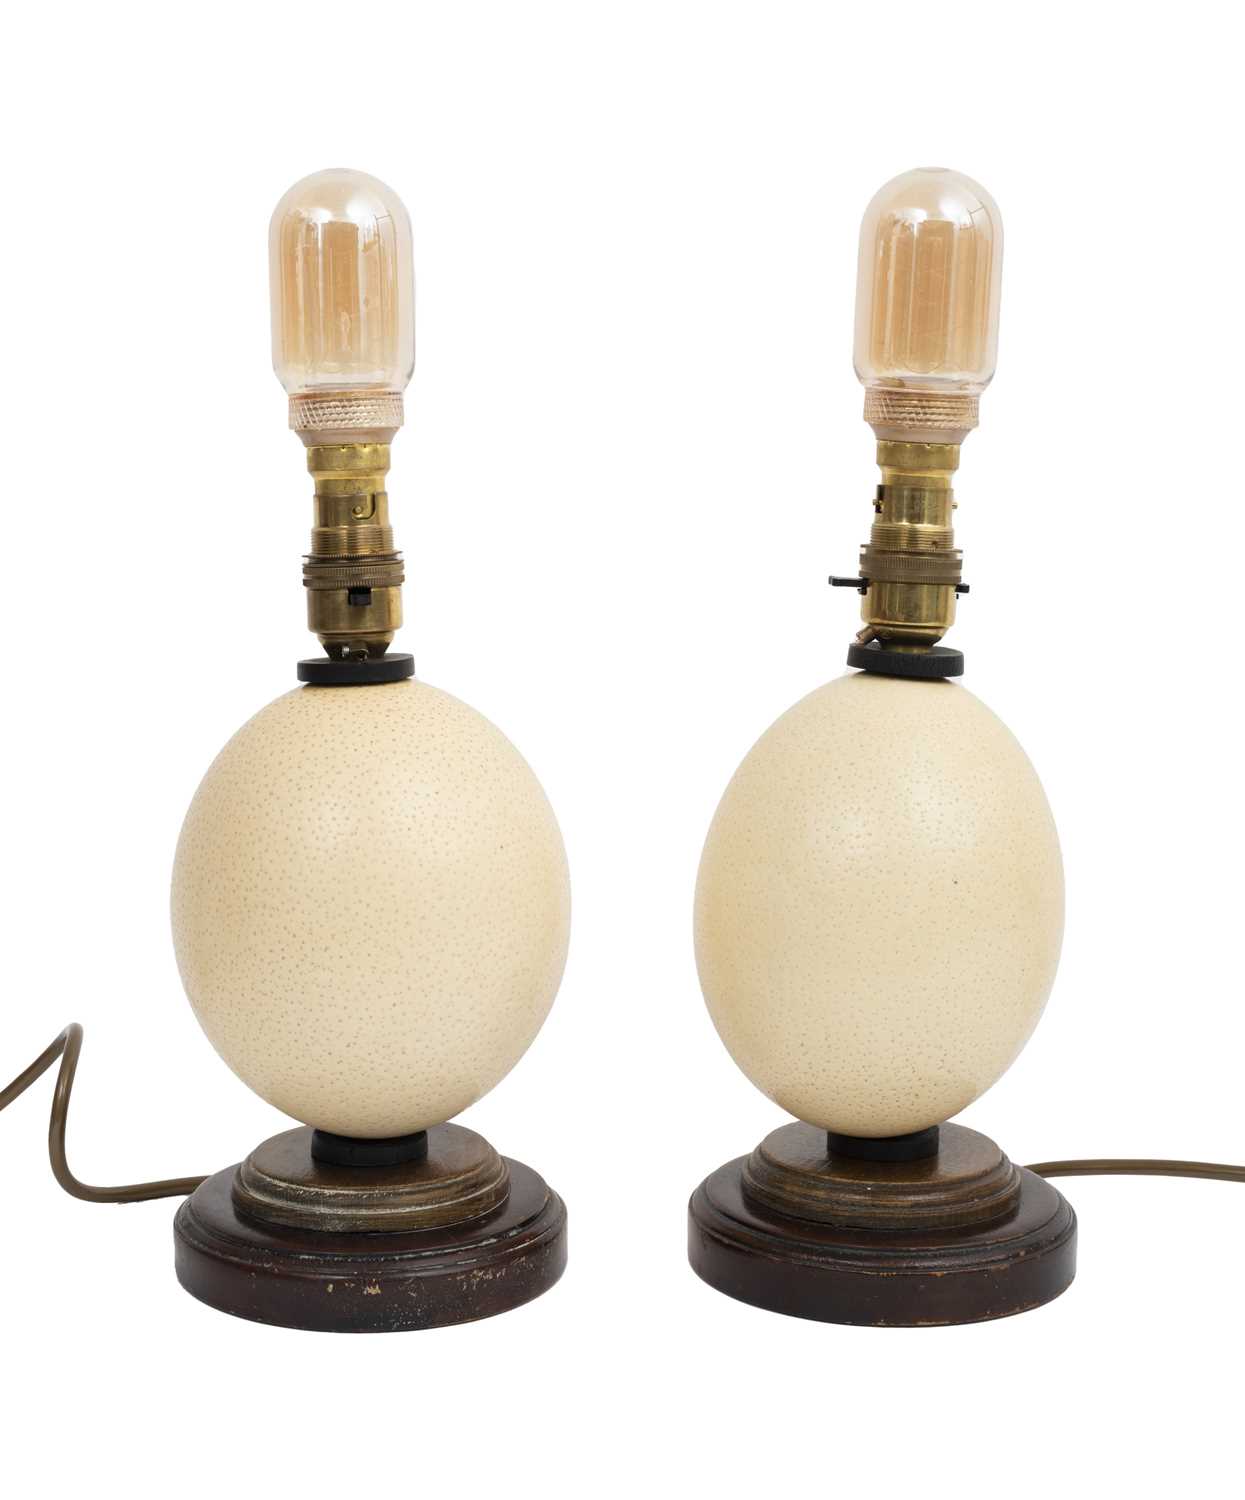 A PAIR OF OSTRICH EGG LAMPS